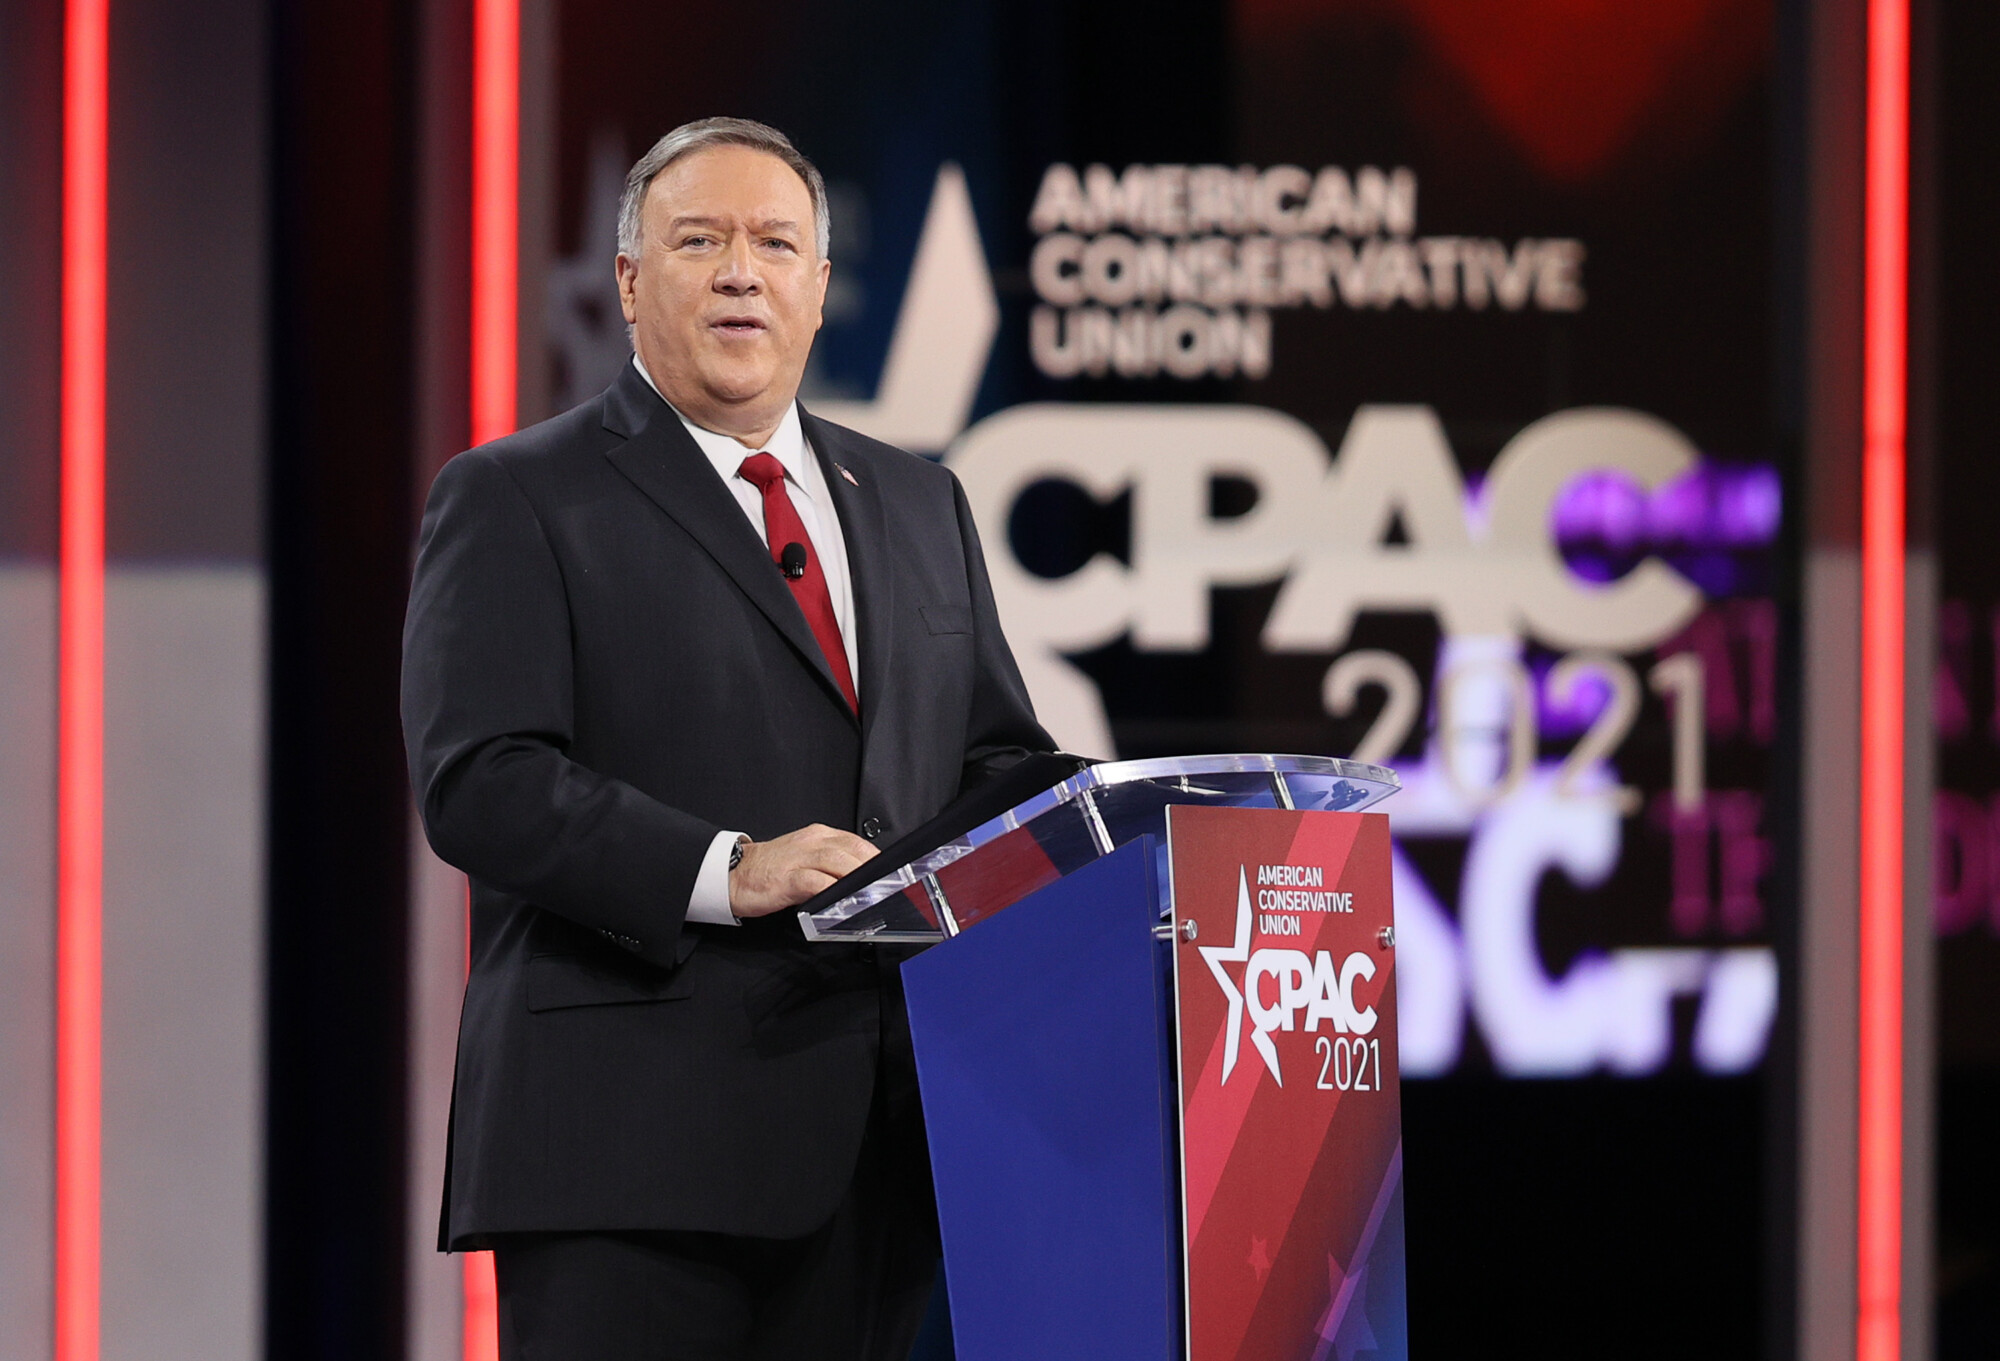 Pompeo Touts Success of Trump’s ‘America First’ Foreign Policy Achievements at CPAC